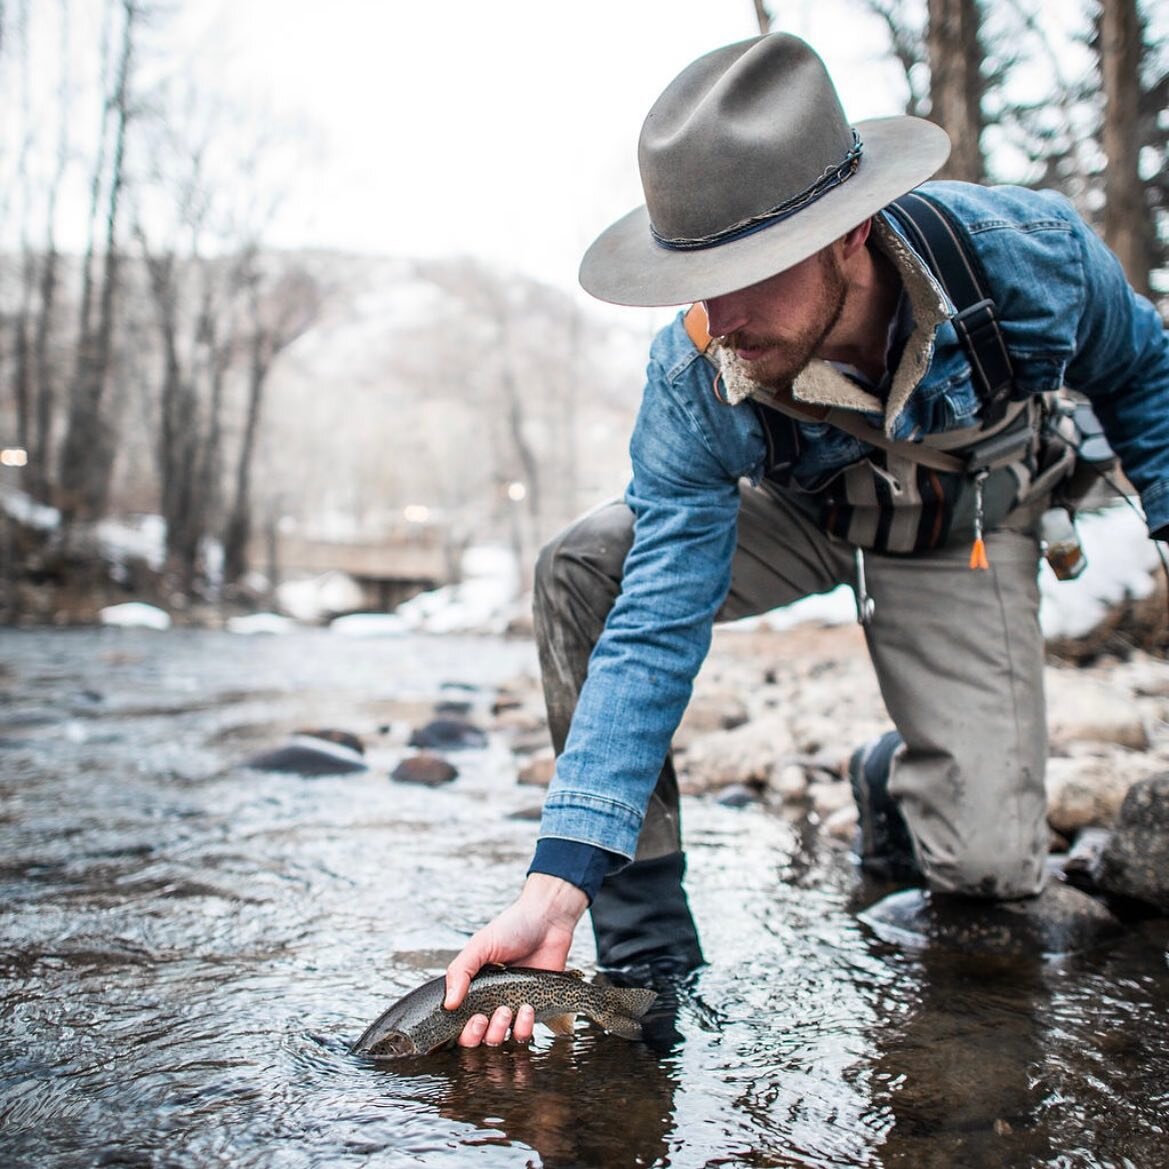 &lsquo;Rivers &amp; the inhabitants of the watery elements are made for wise men to contemplate.&rsquo;- Izaac Walton 🎣
&bull;
&bull;
&bull; 📷 @siriraitto 
#aspenhatter #customhats #bespoke #artisans #locallymade #customhat #hatter #westernvibes #a